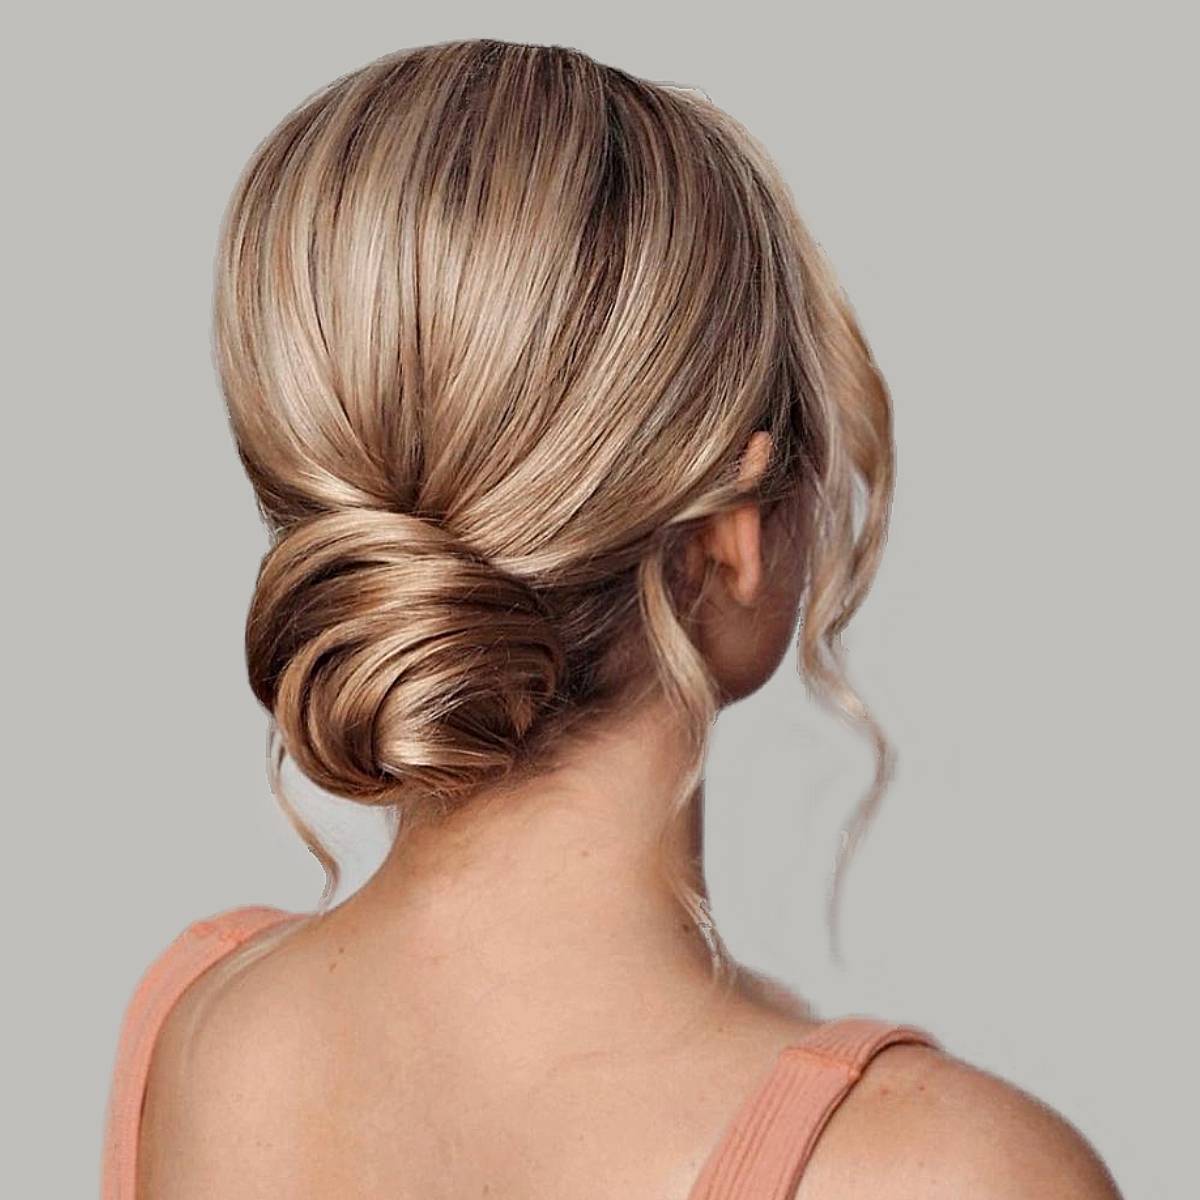 Discover 147+ up due hairstyles